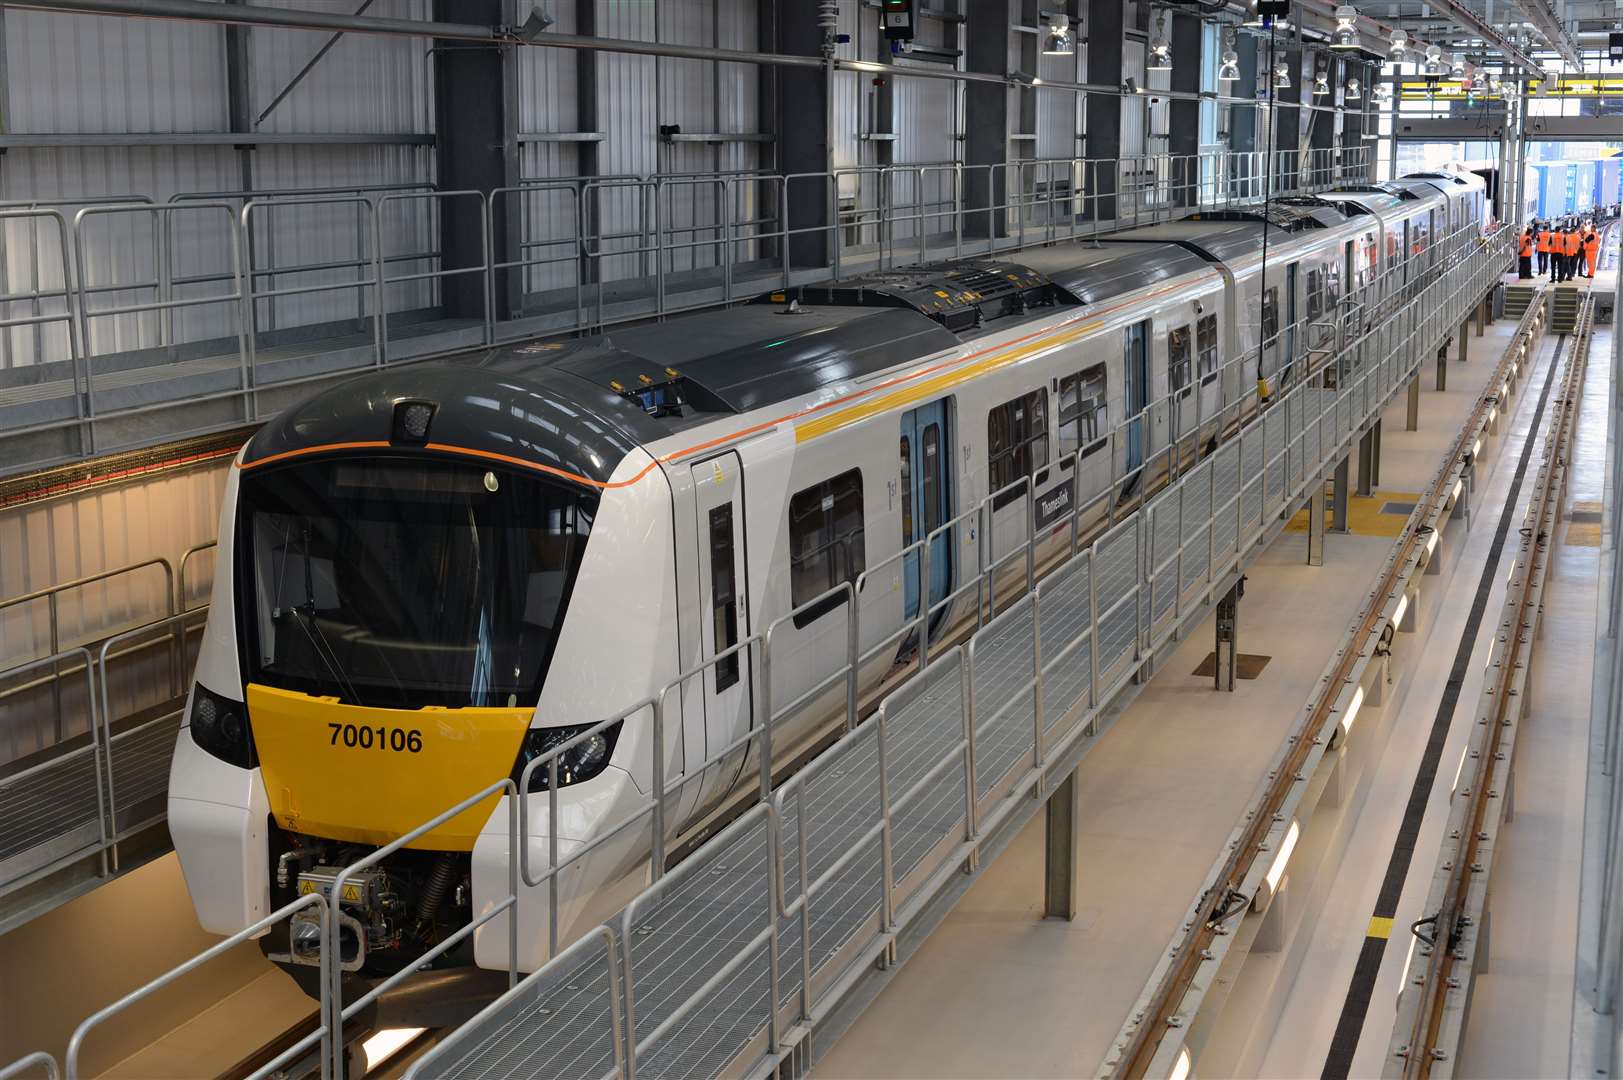 The Thameslink service connecting west Kent and the capital has been delayed several times